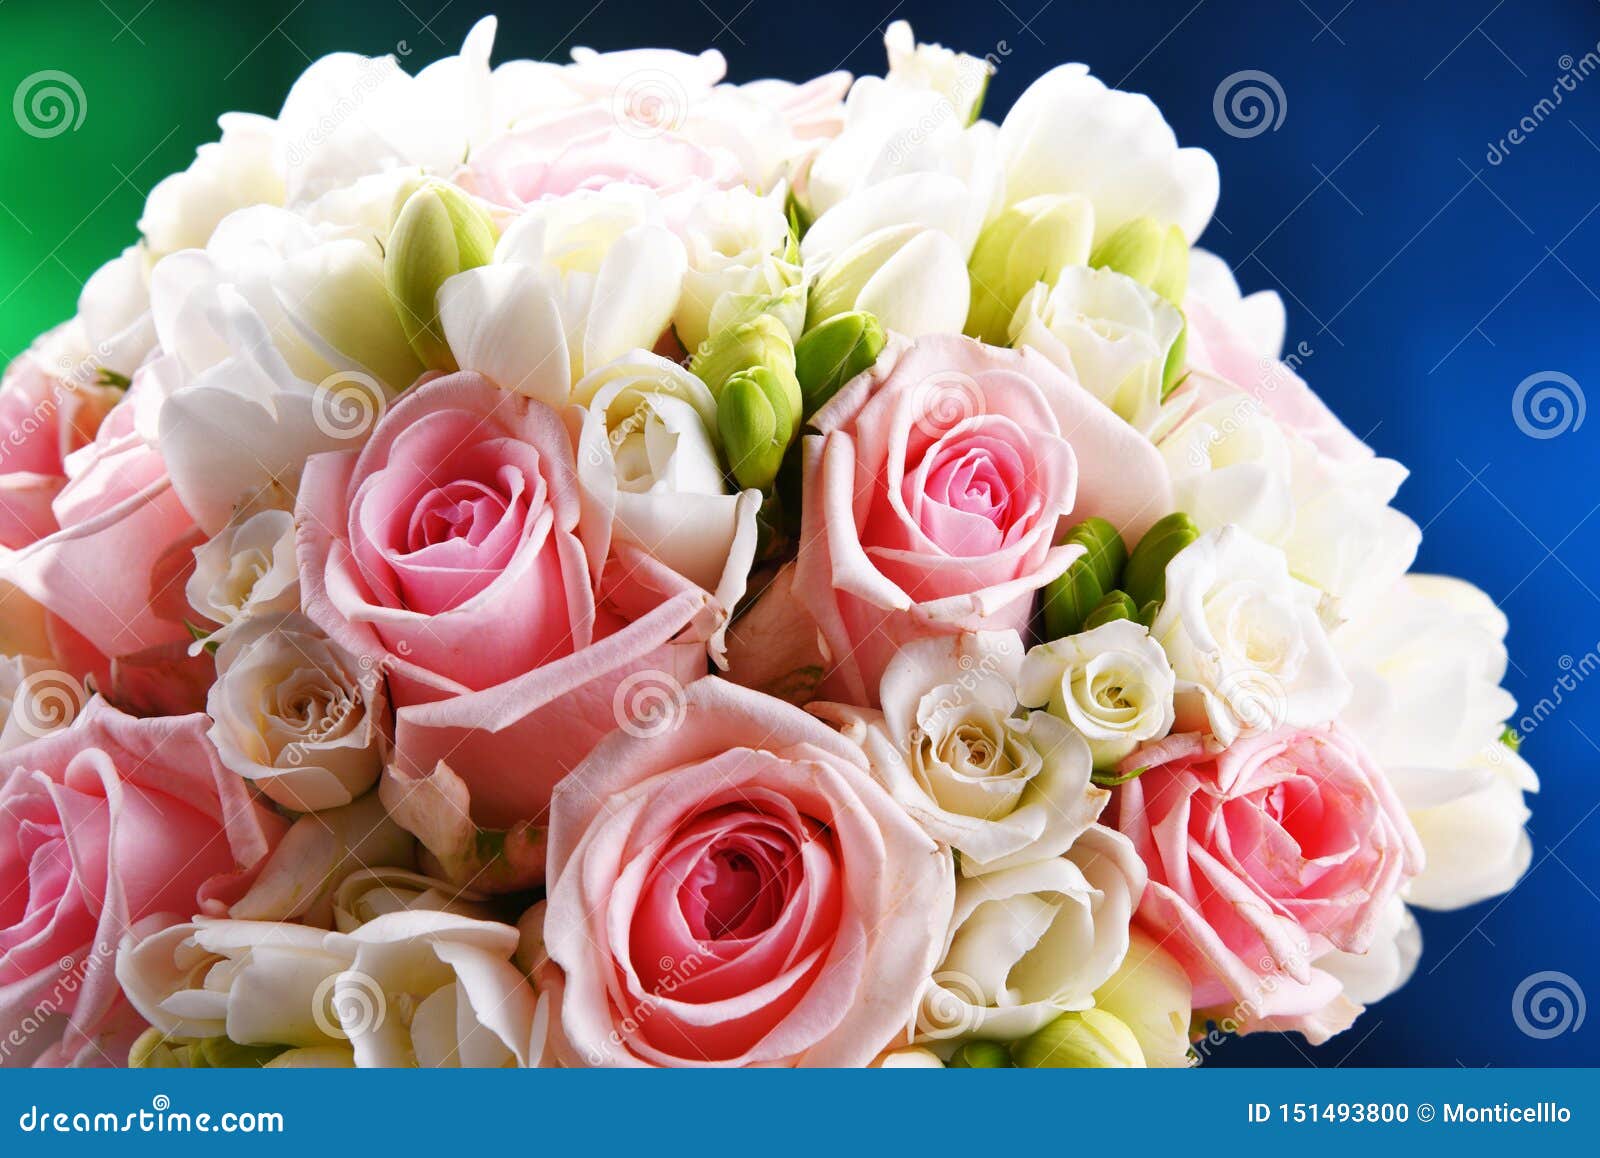 Composition with Bouquet of Freshly Cut Flowers Stock Photo - Image of ...